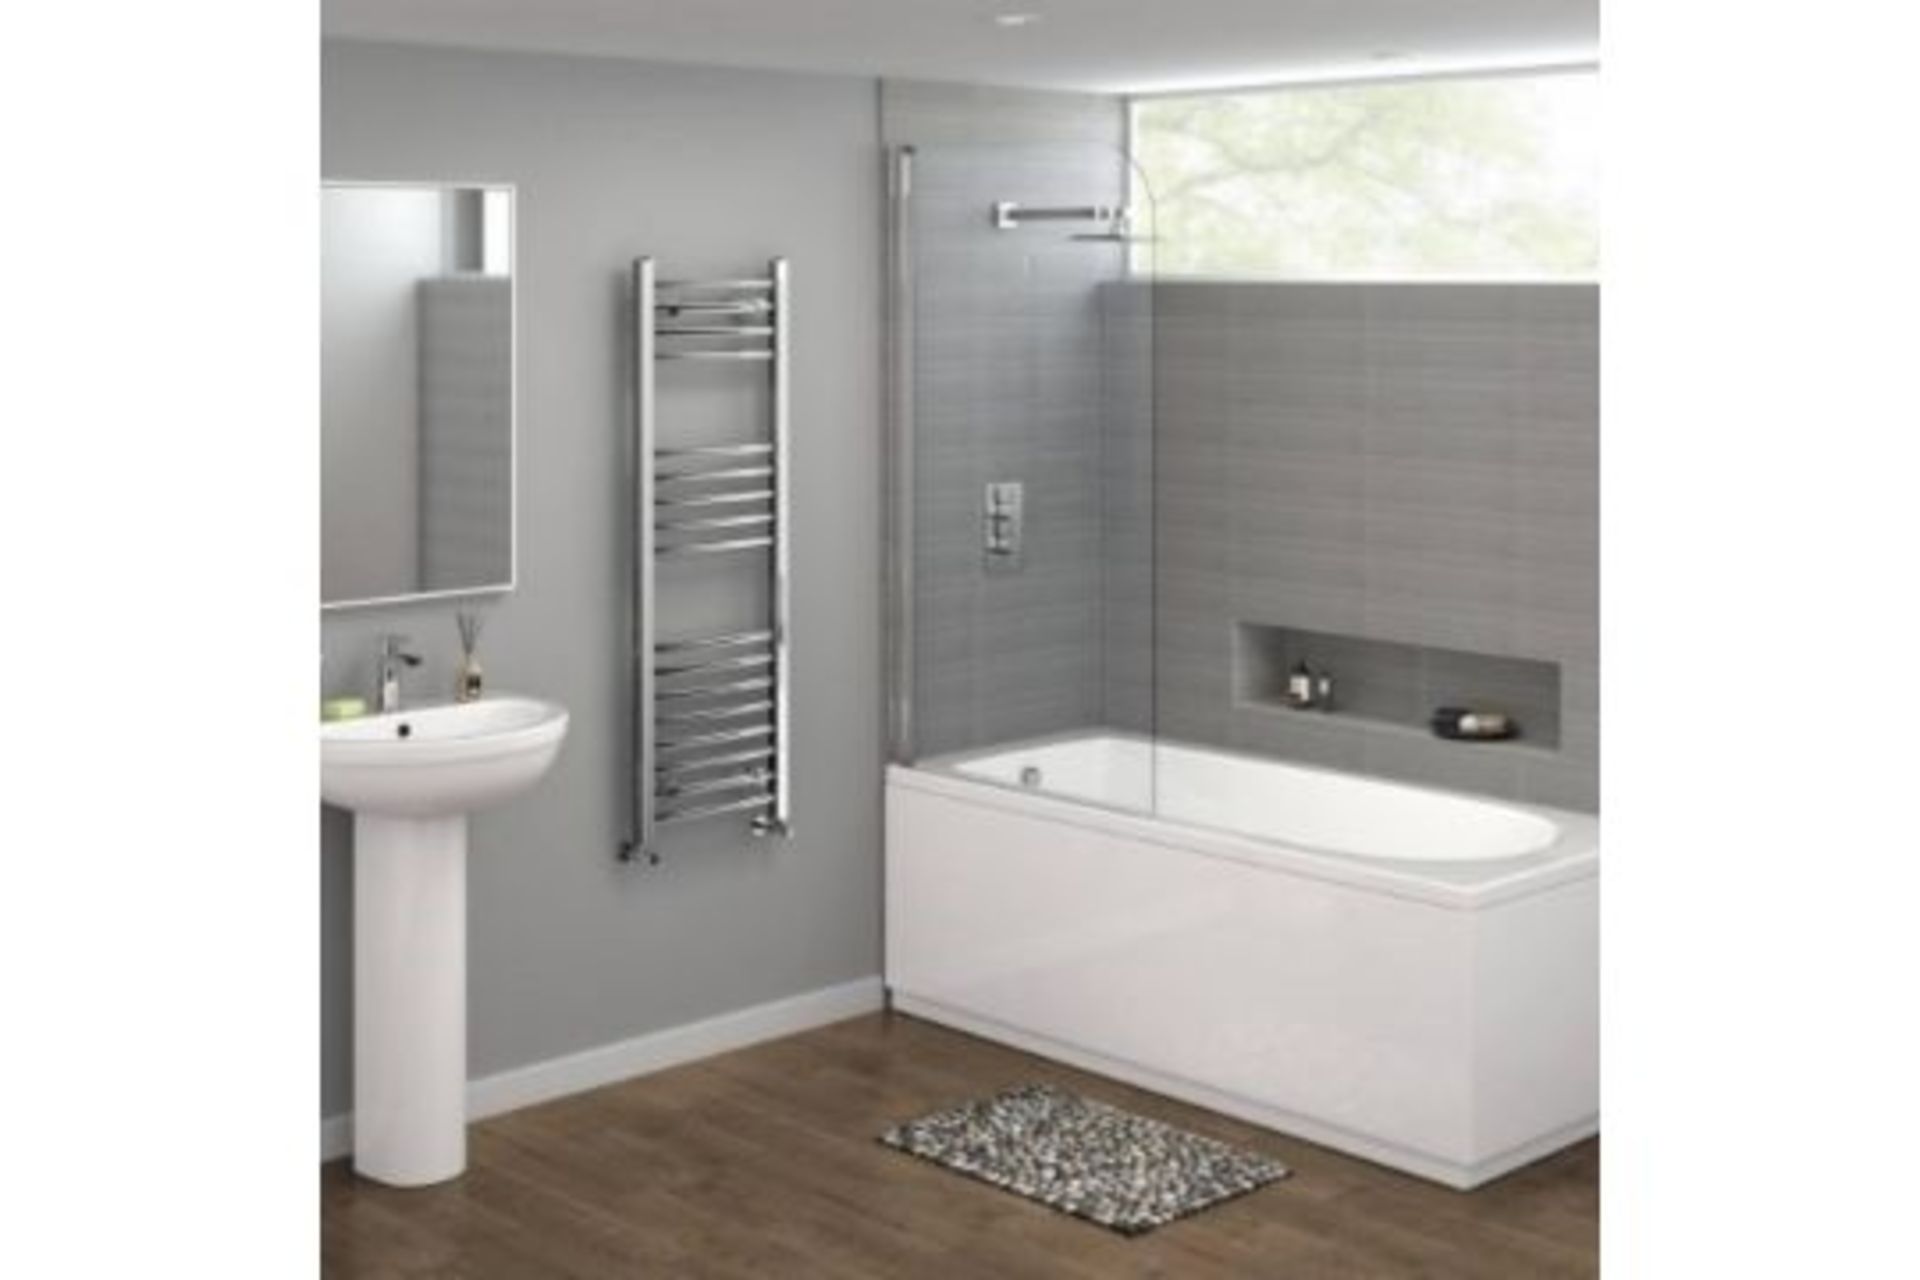 NEW & BOXED 1200x400mm - 20mm Tubes - Chrome Curved Rail Ladder Towel Radiator. NC1200400.Our - Image 2 of 2